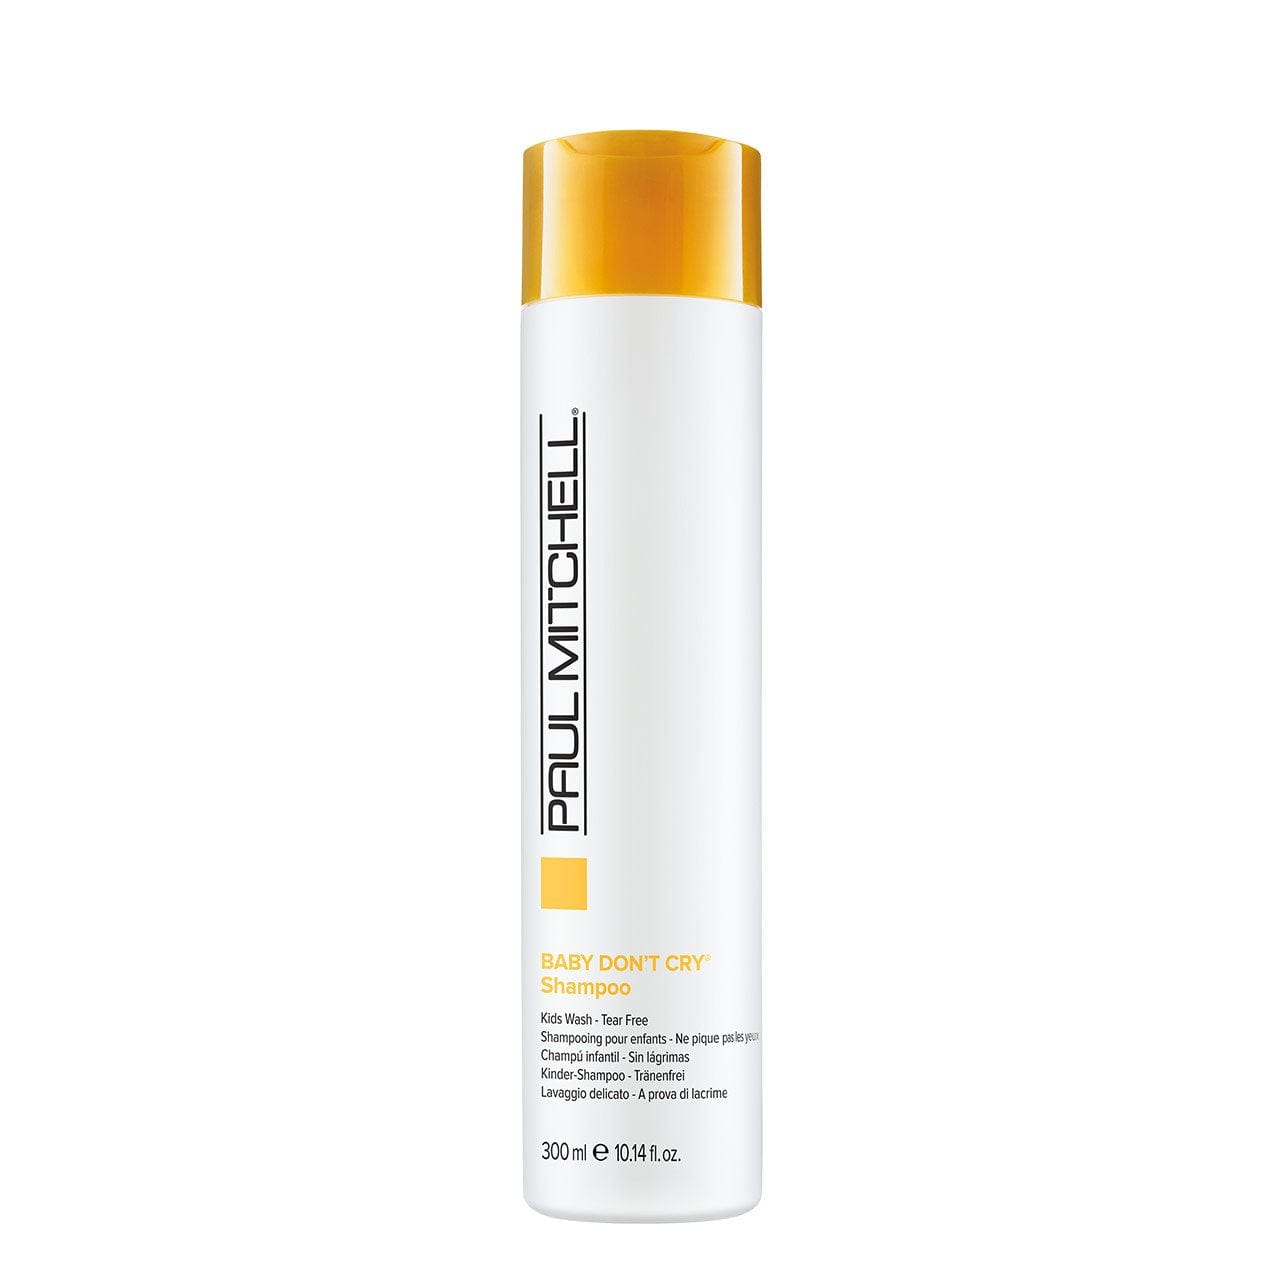 Baby Don't Cry Shampoo 300ml Hair - Paul Mitchell - Luxe Pacifique